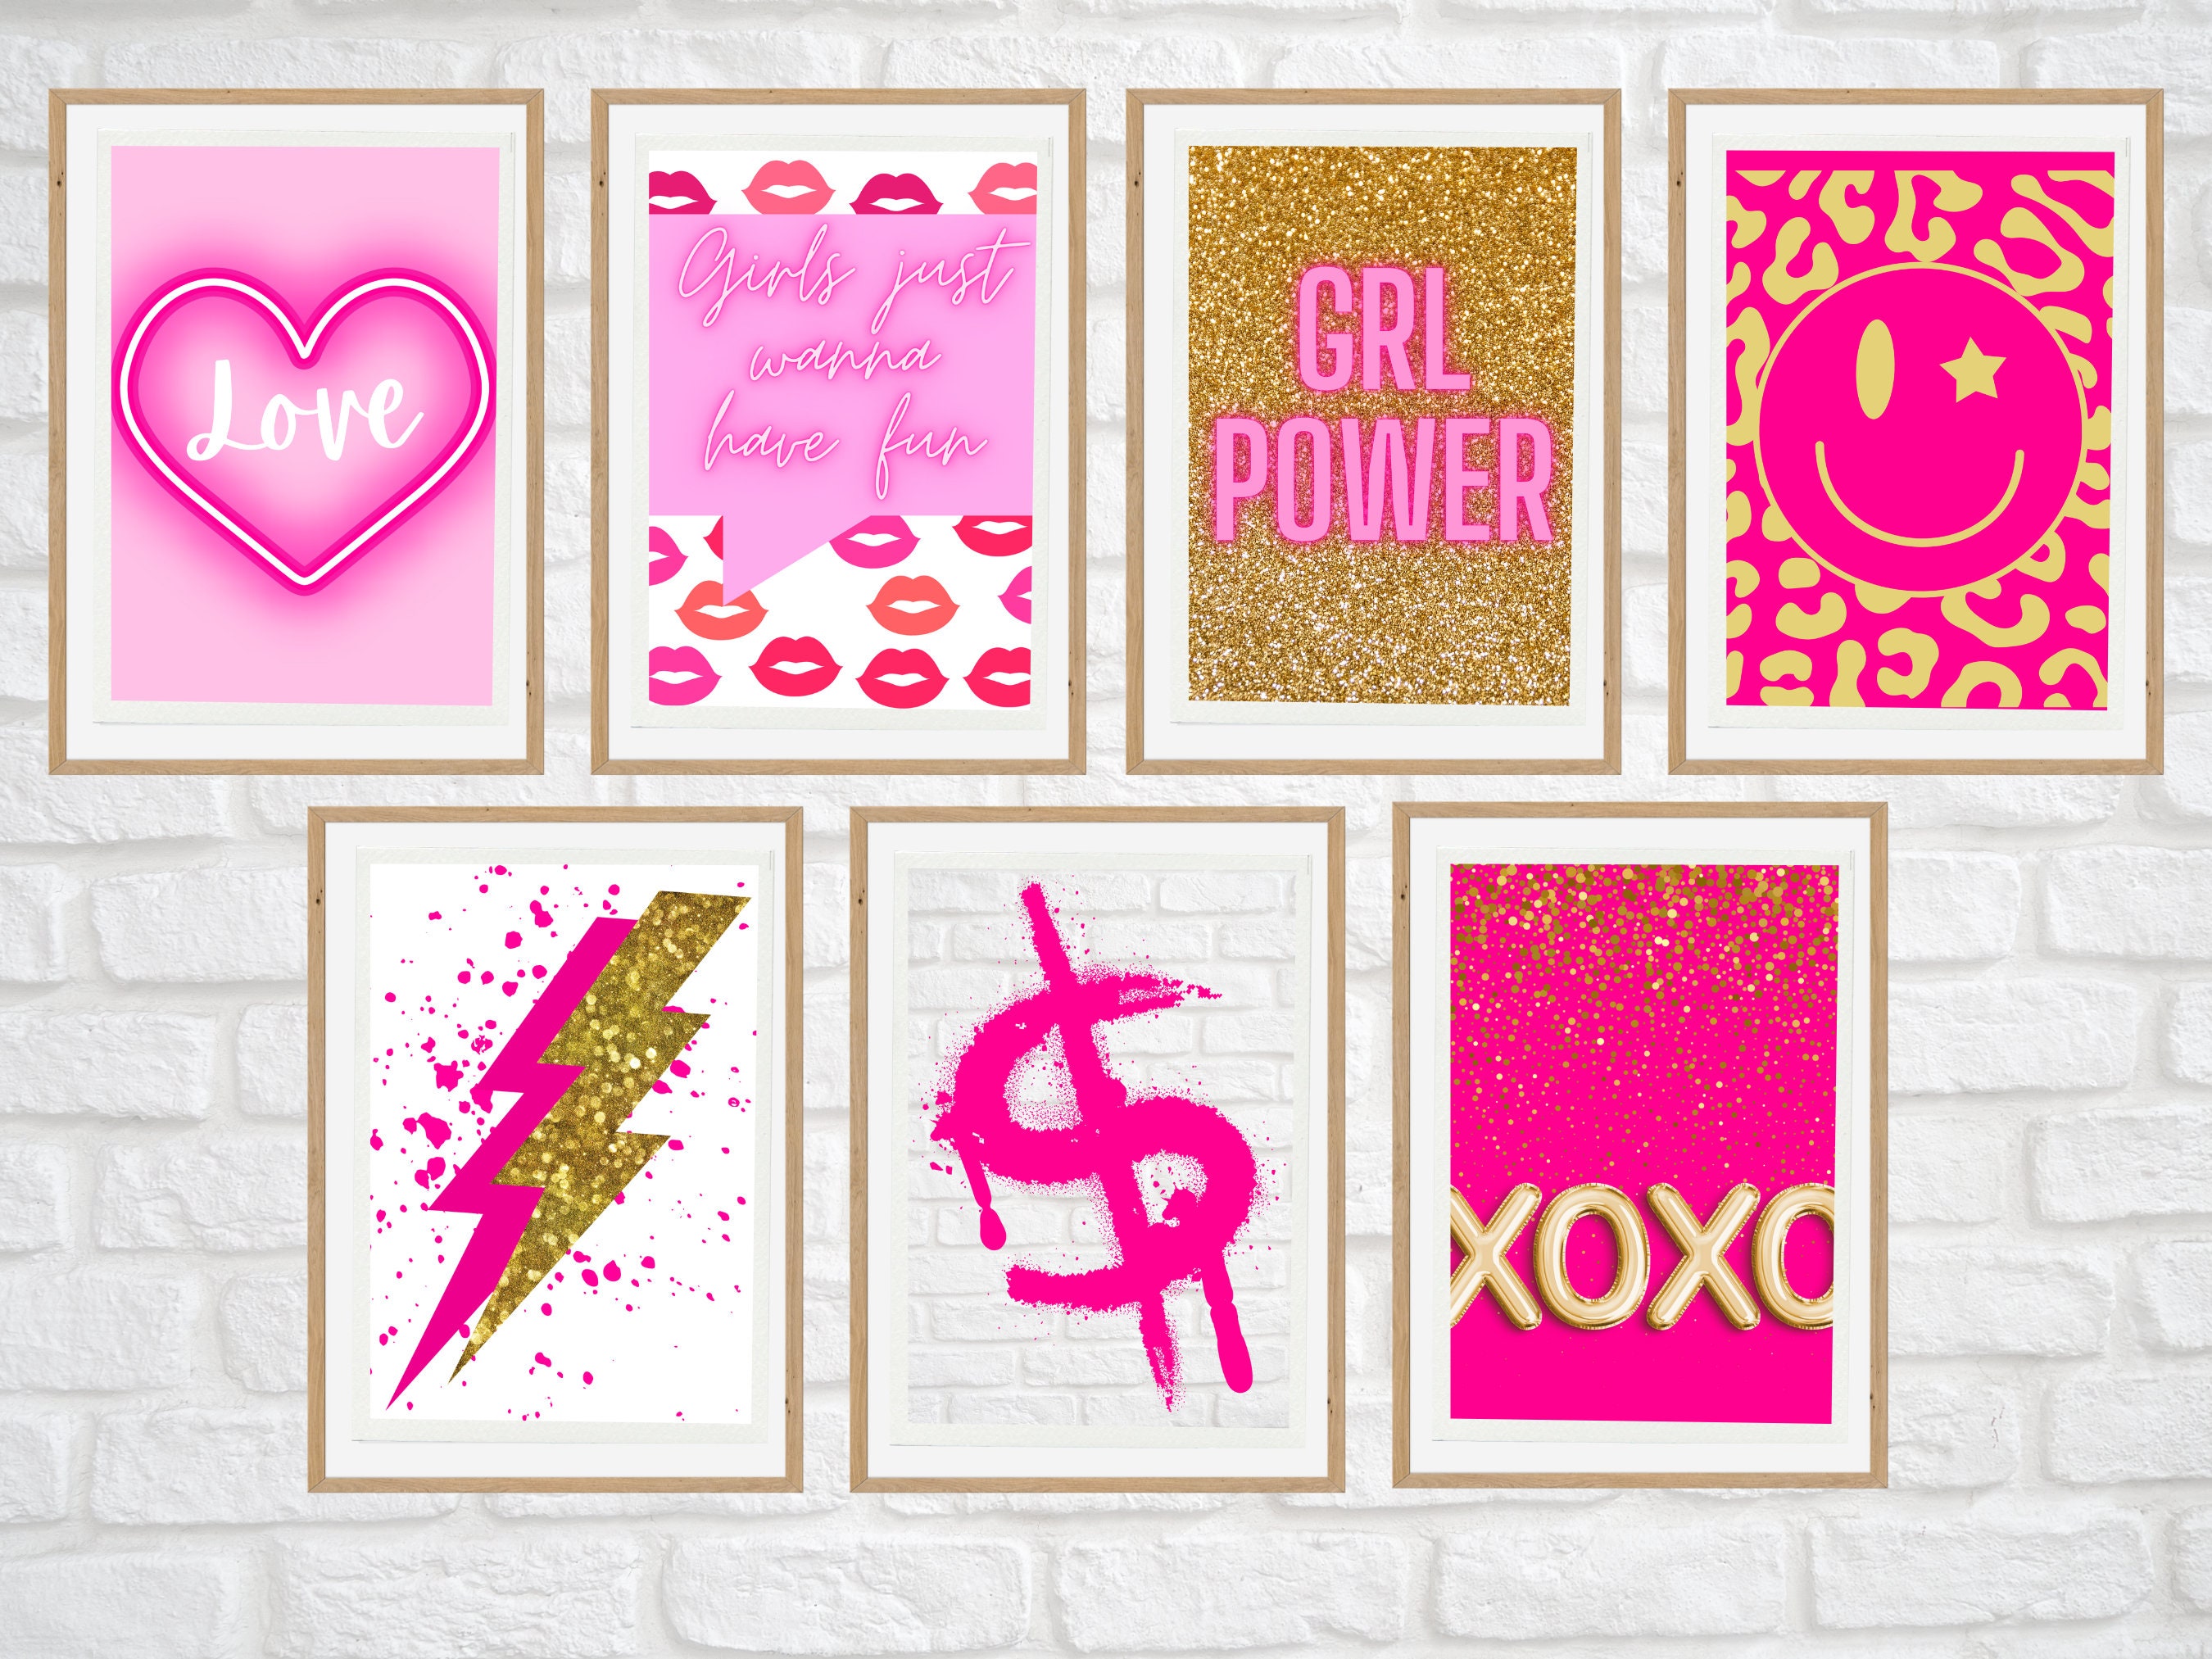 WALTSOM Preppy Room Decor - Hot Pink Canvas Wall Art Set for Teen Girls  Bedroom and College Dorm, 8x10 inch